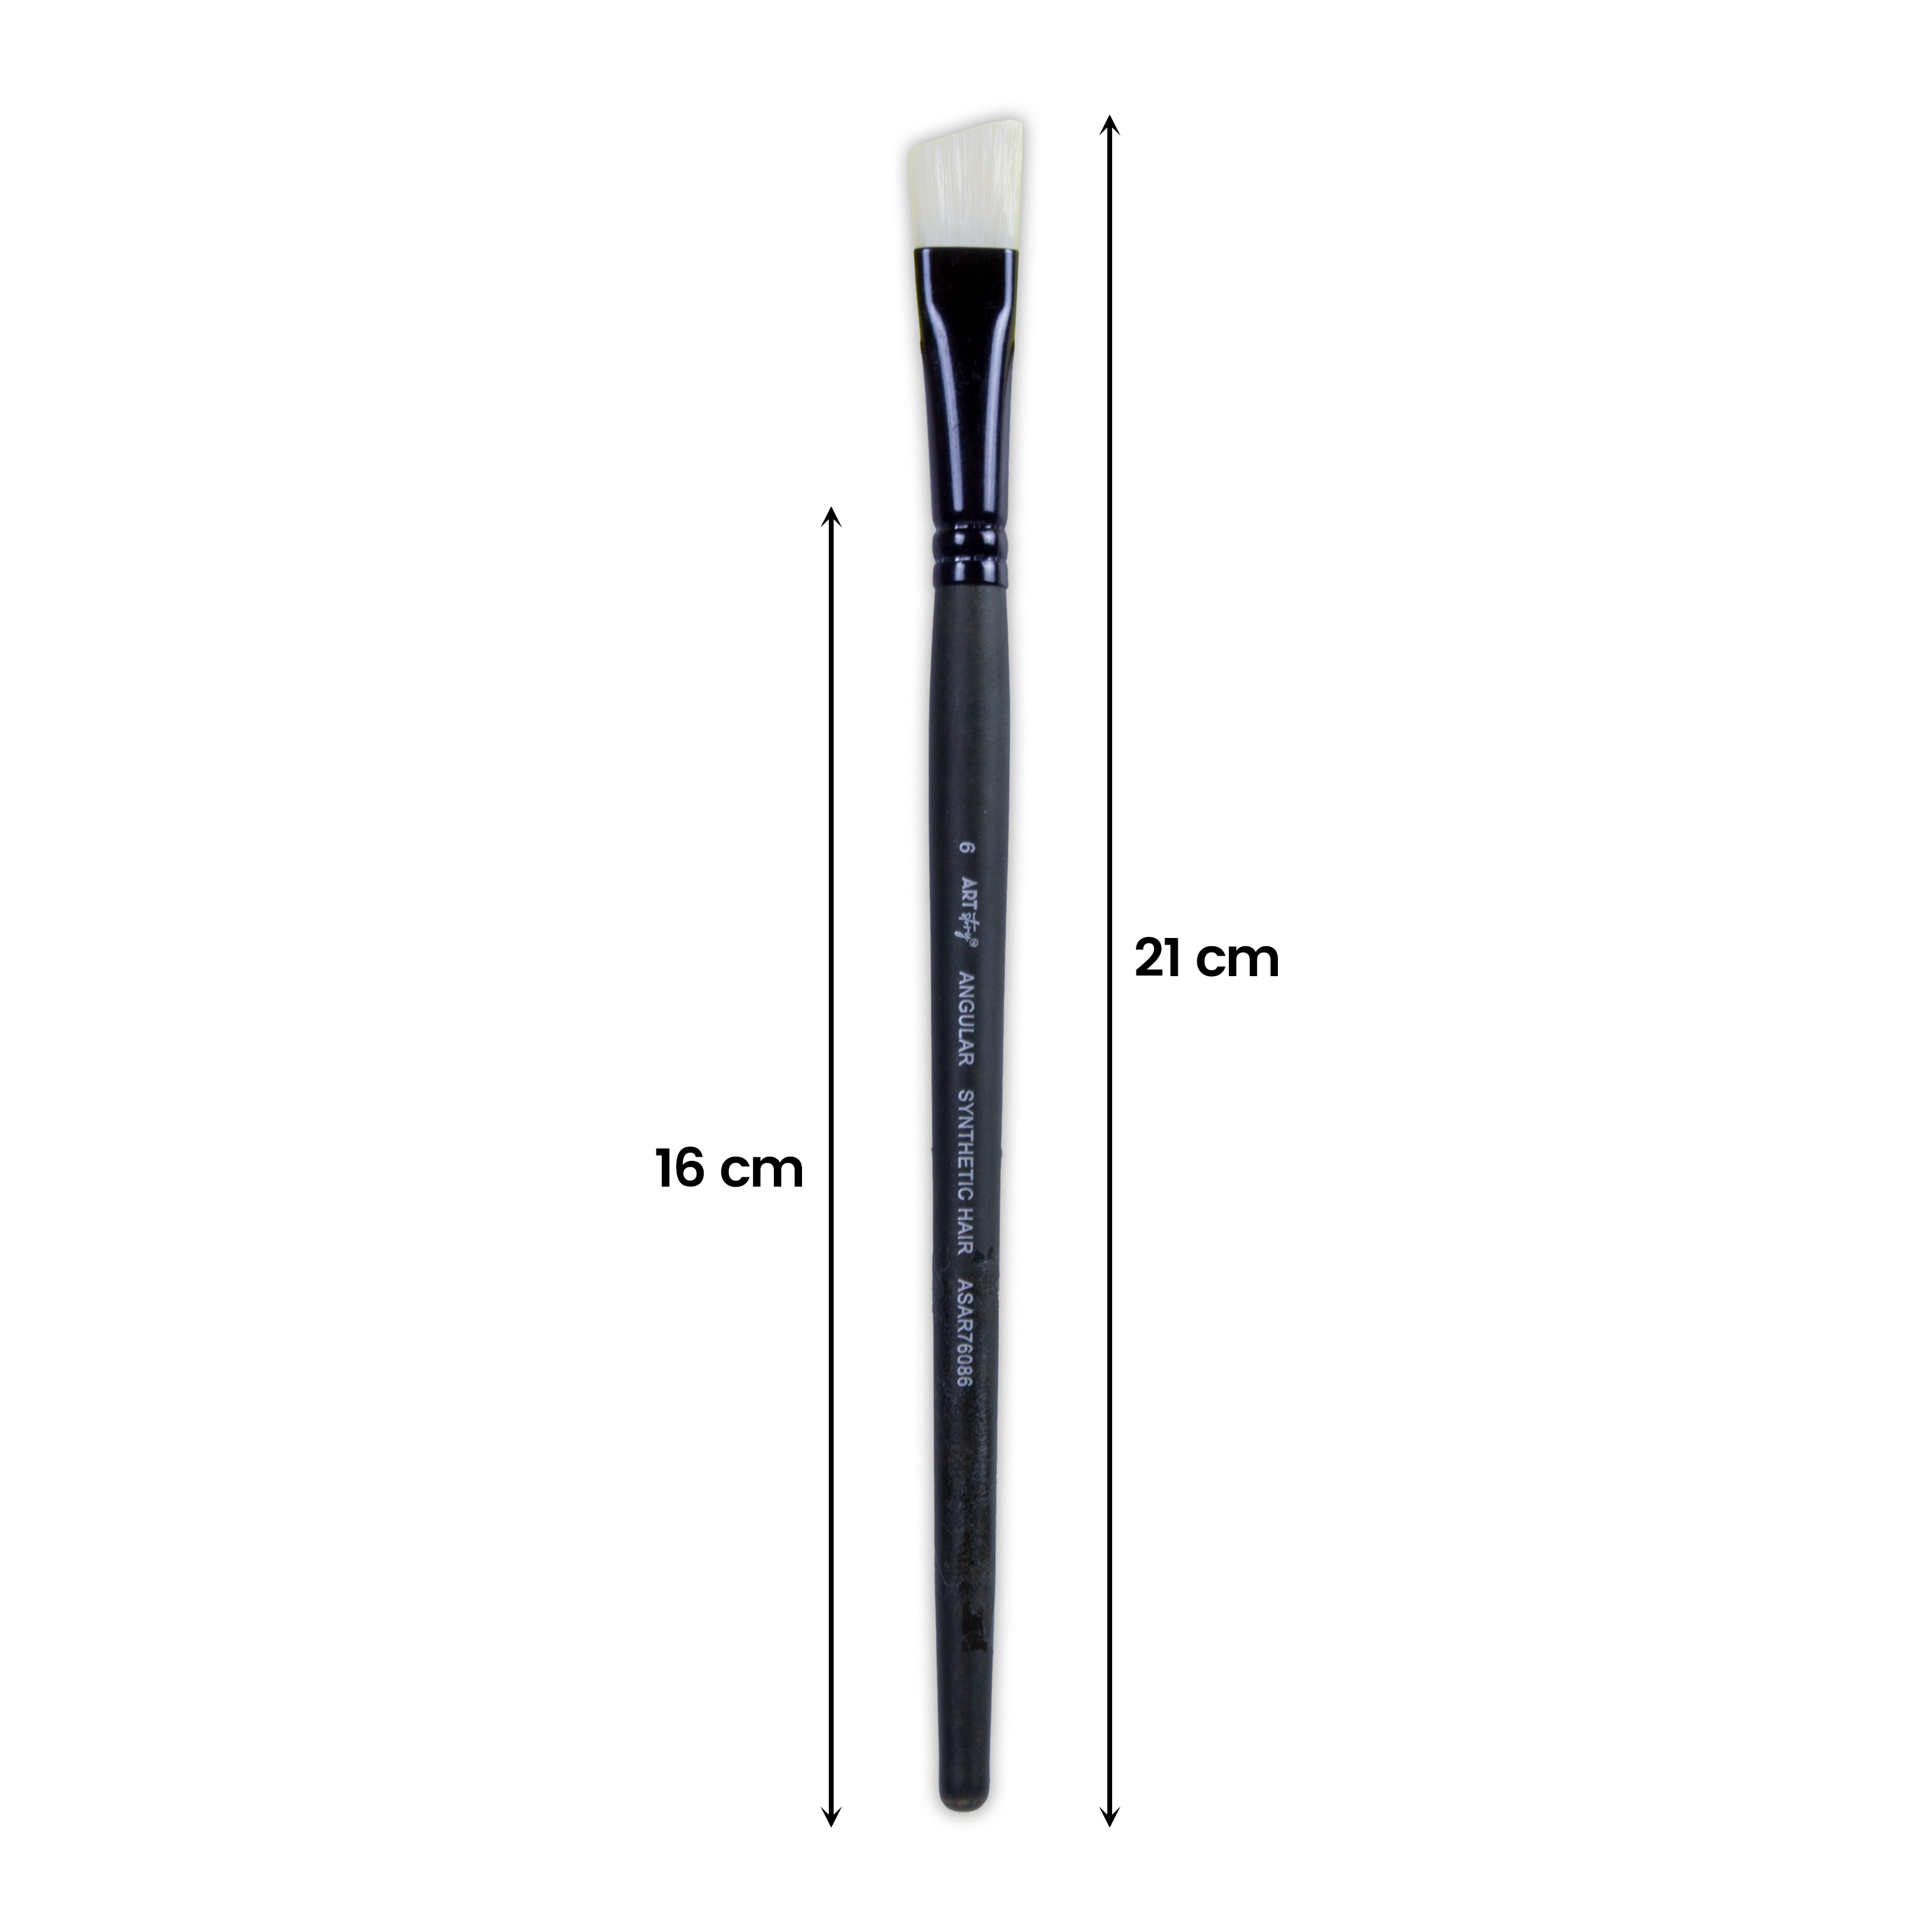 Pro Oil Brush Angular Synthetic Hair Size 6 Handle Length 165mm 1pc